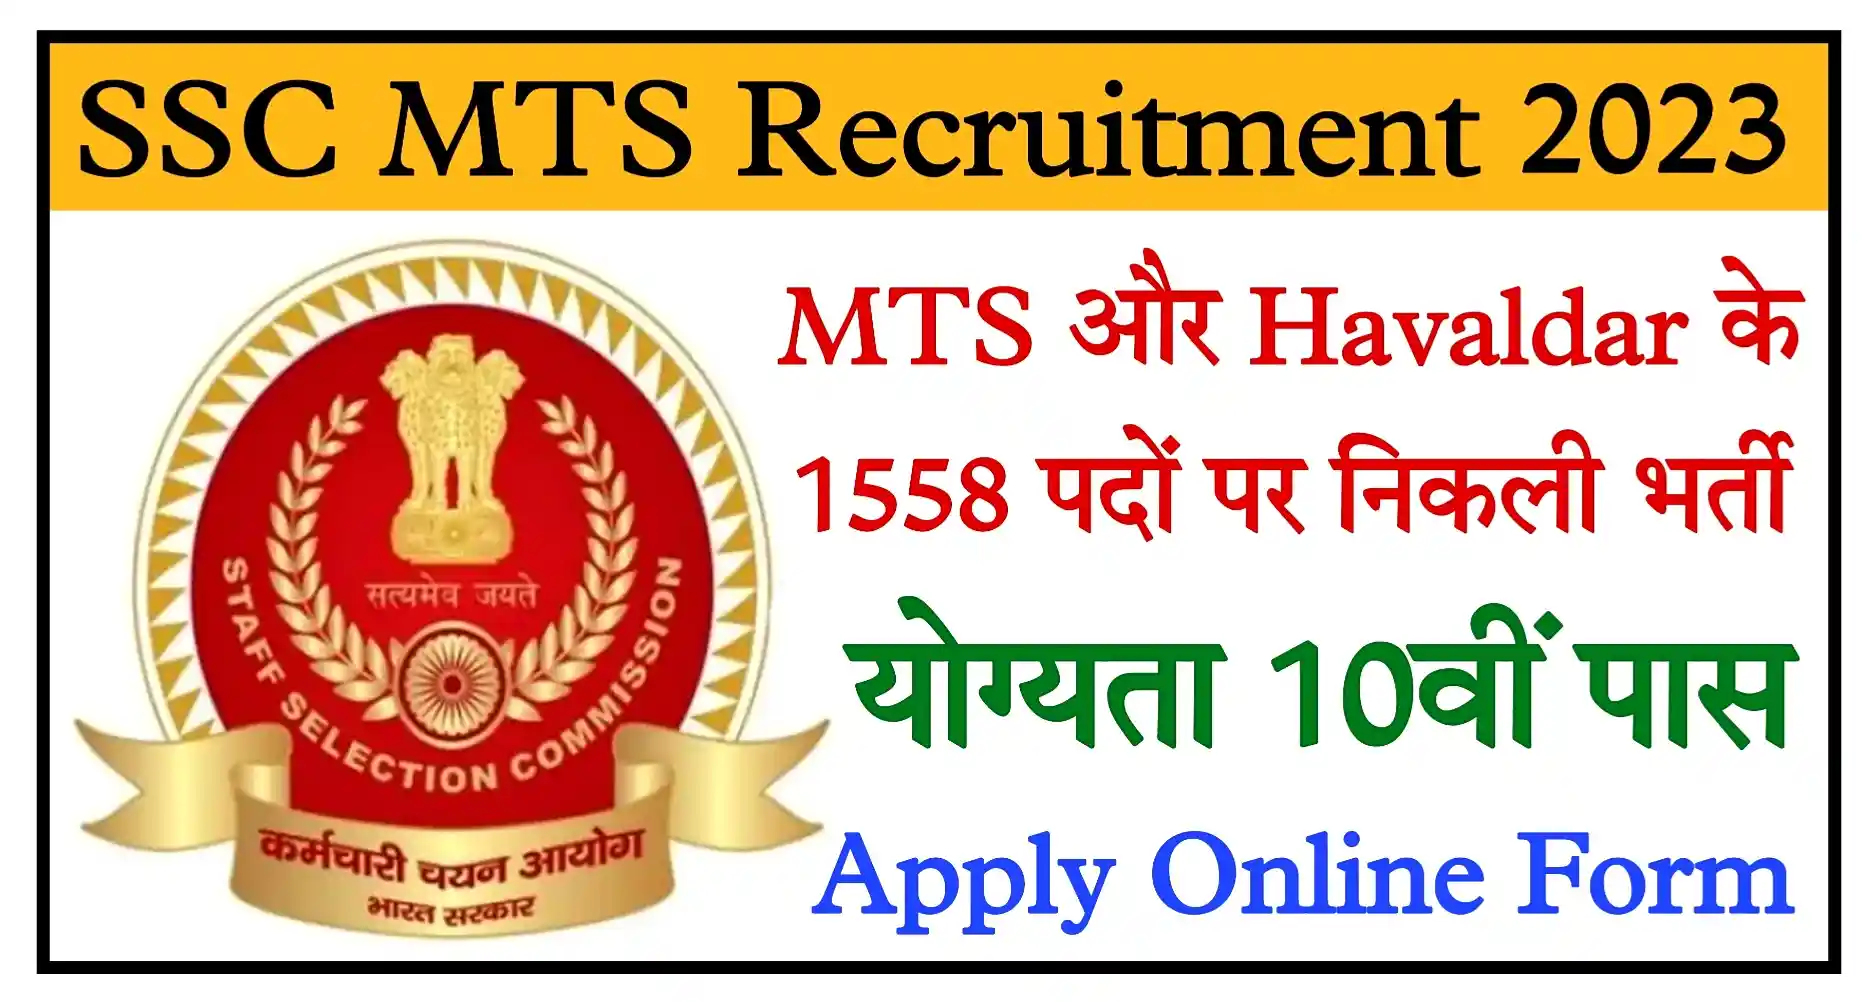 SSC MTS Recruitment 2023 Notification, Apply Online (1558 Posts) Exam Date, Syllabus Check Now